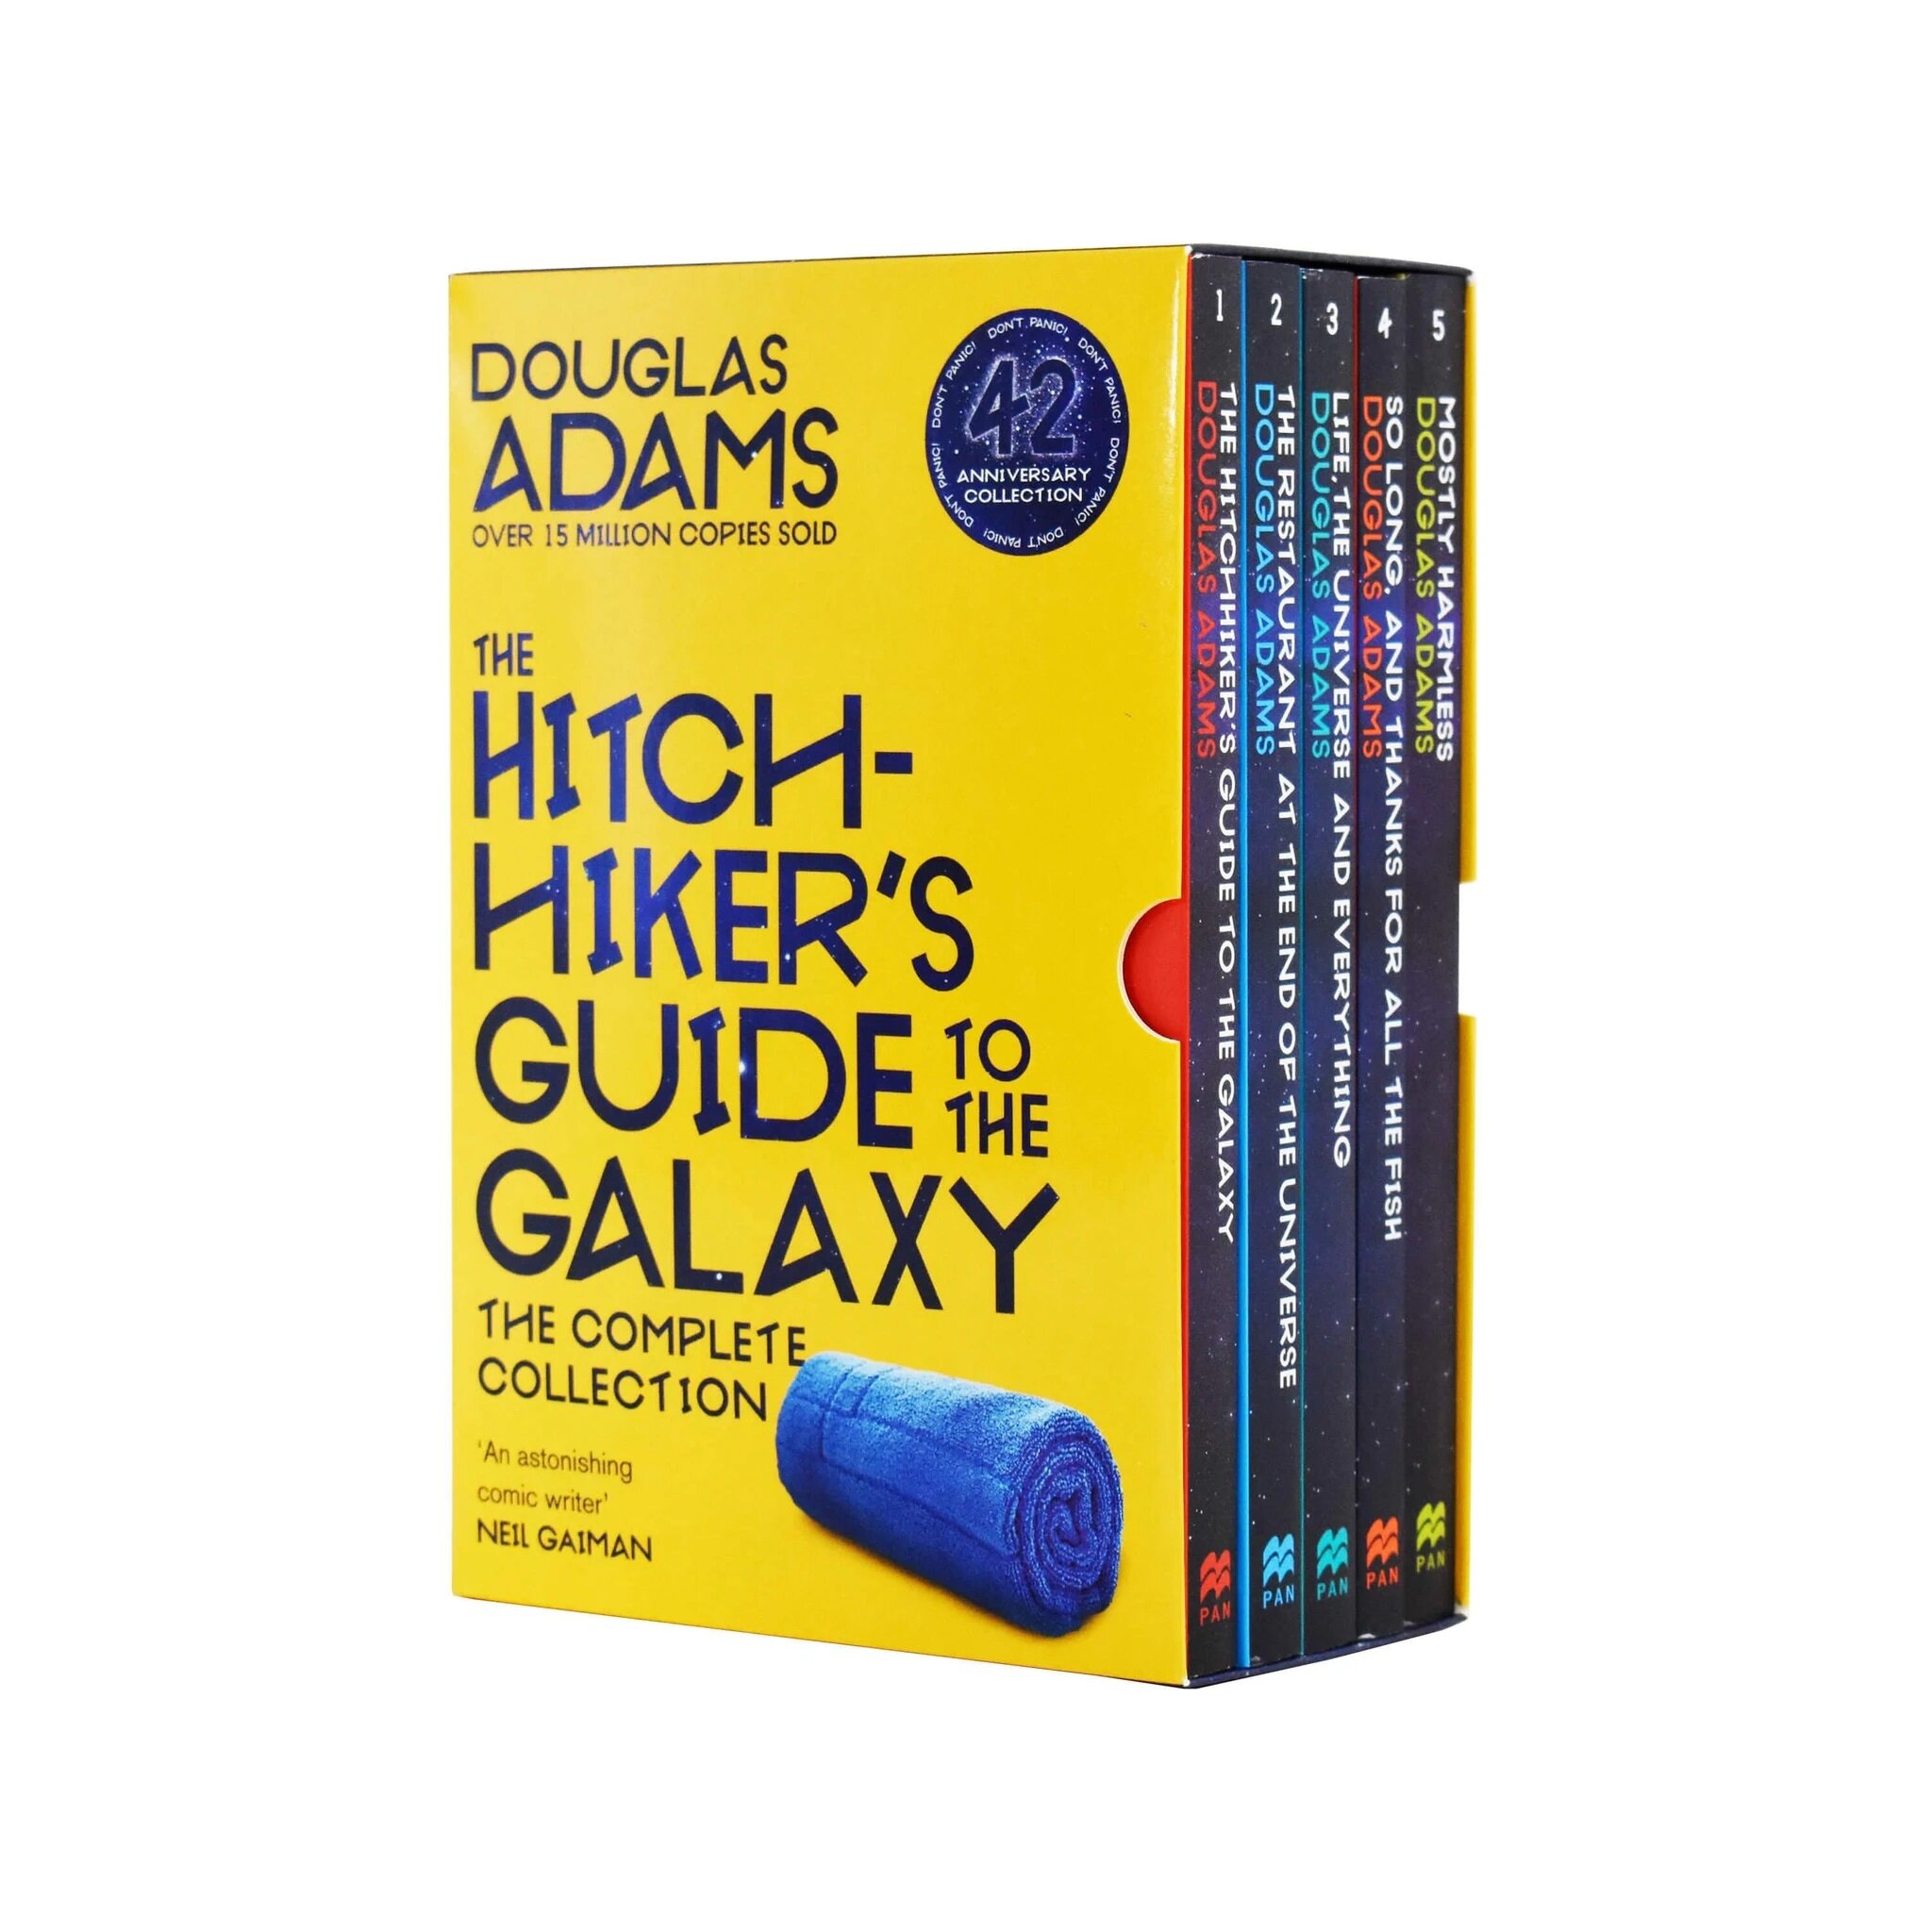 The Complete Hitchhikers Guide to the Galaxy Boxset (Multiple-component retail product)